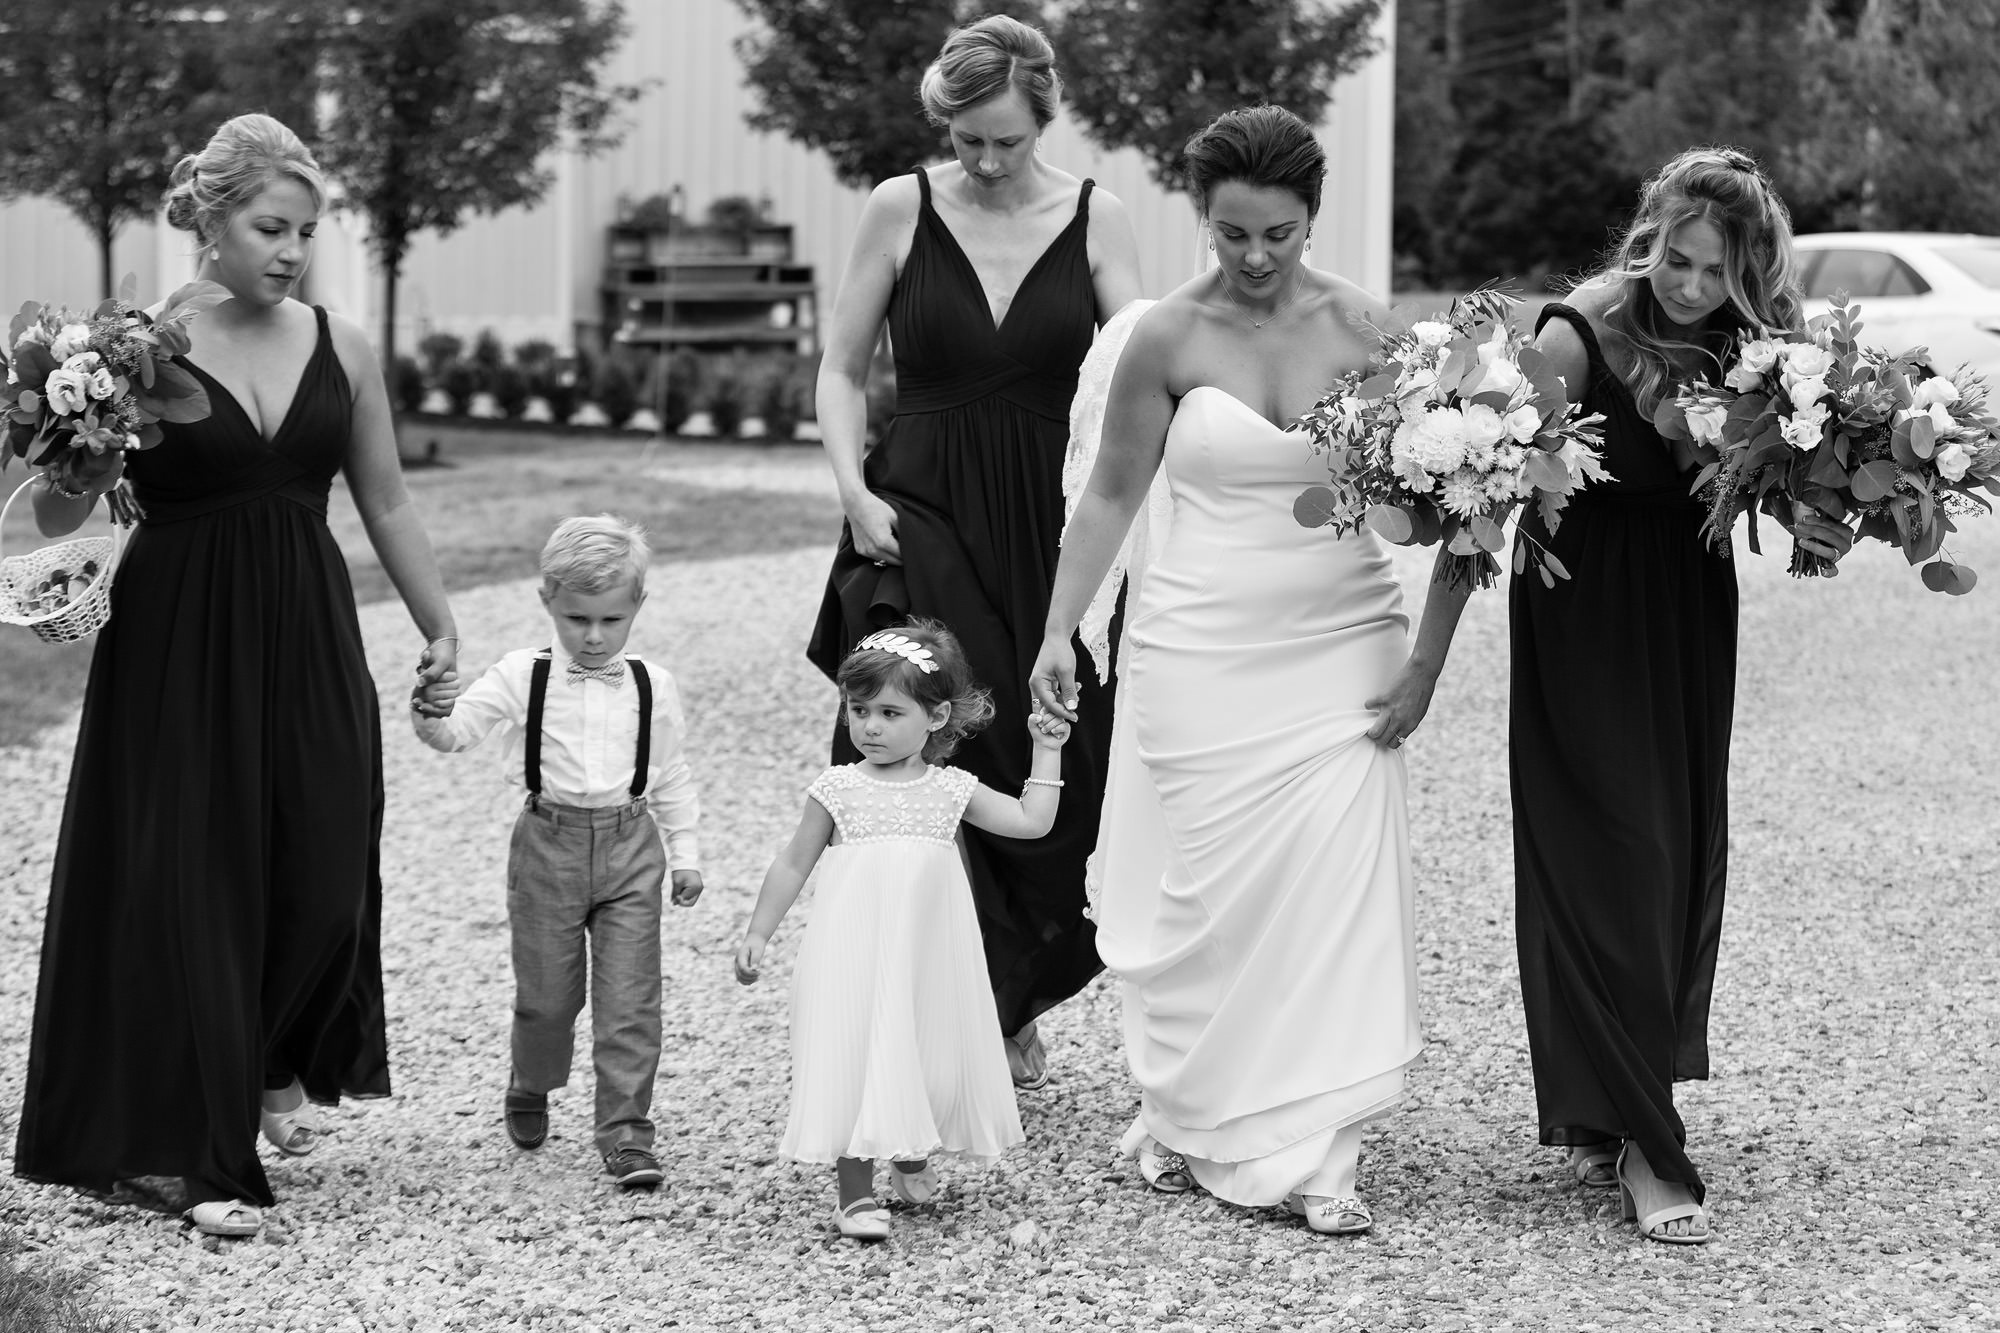 The bride walks with her bridesmaids to the wedding ceremony